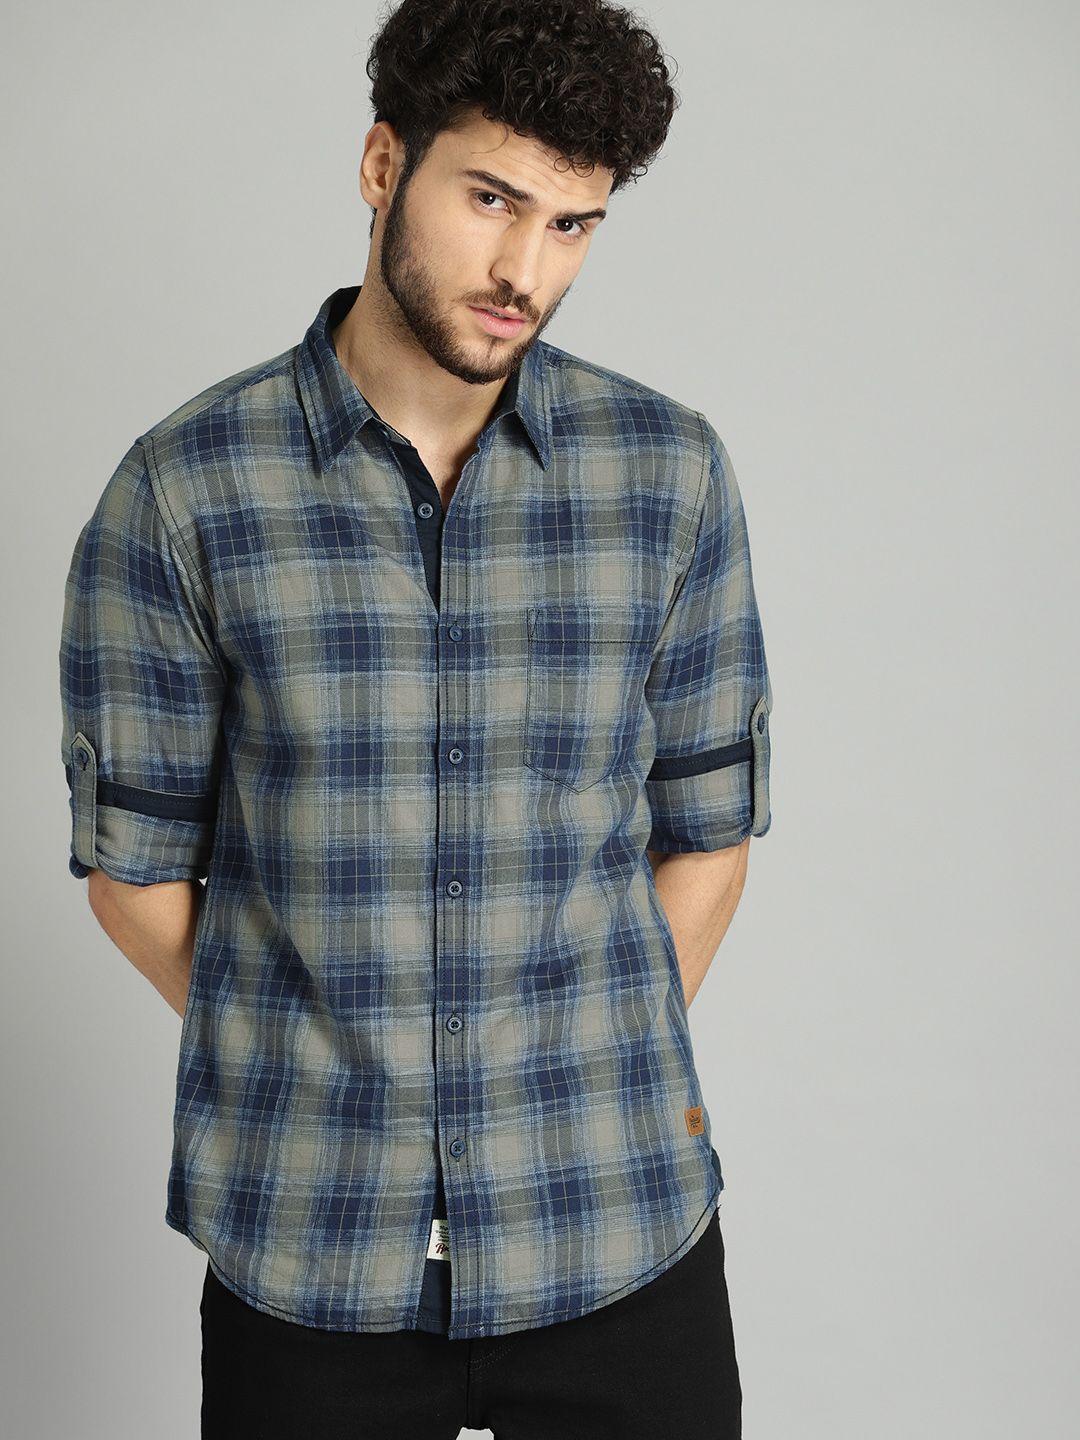 Roadster Men Navy Blue & Grey Checked Casual Sustainable Shirt